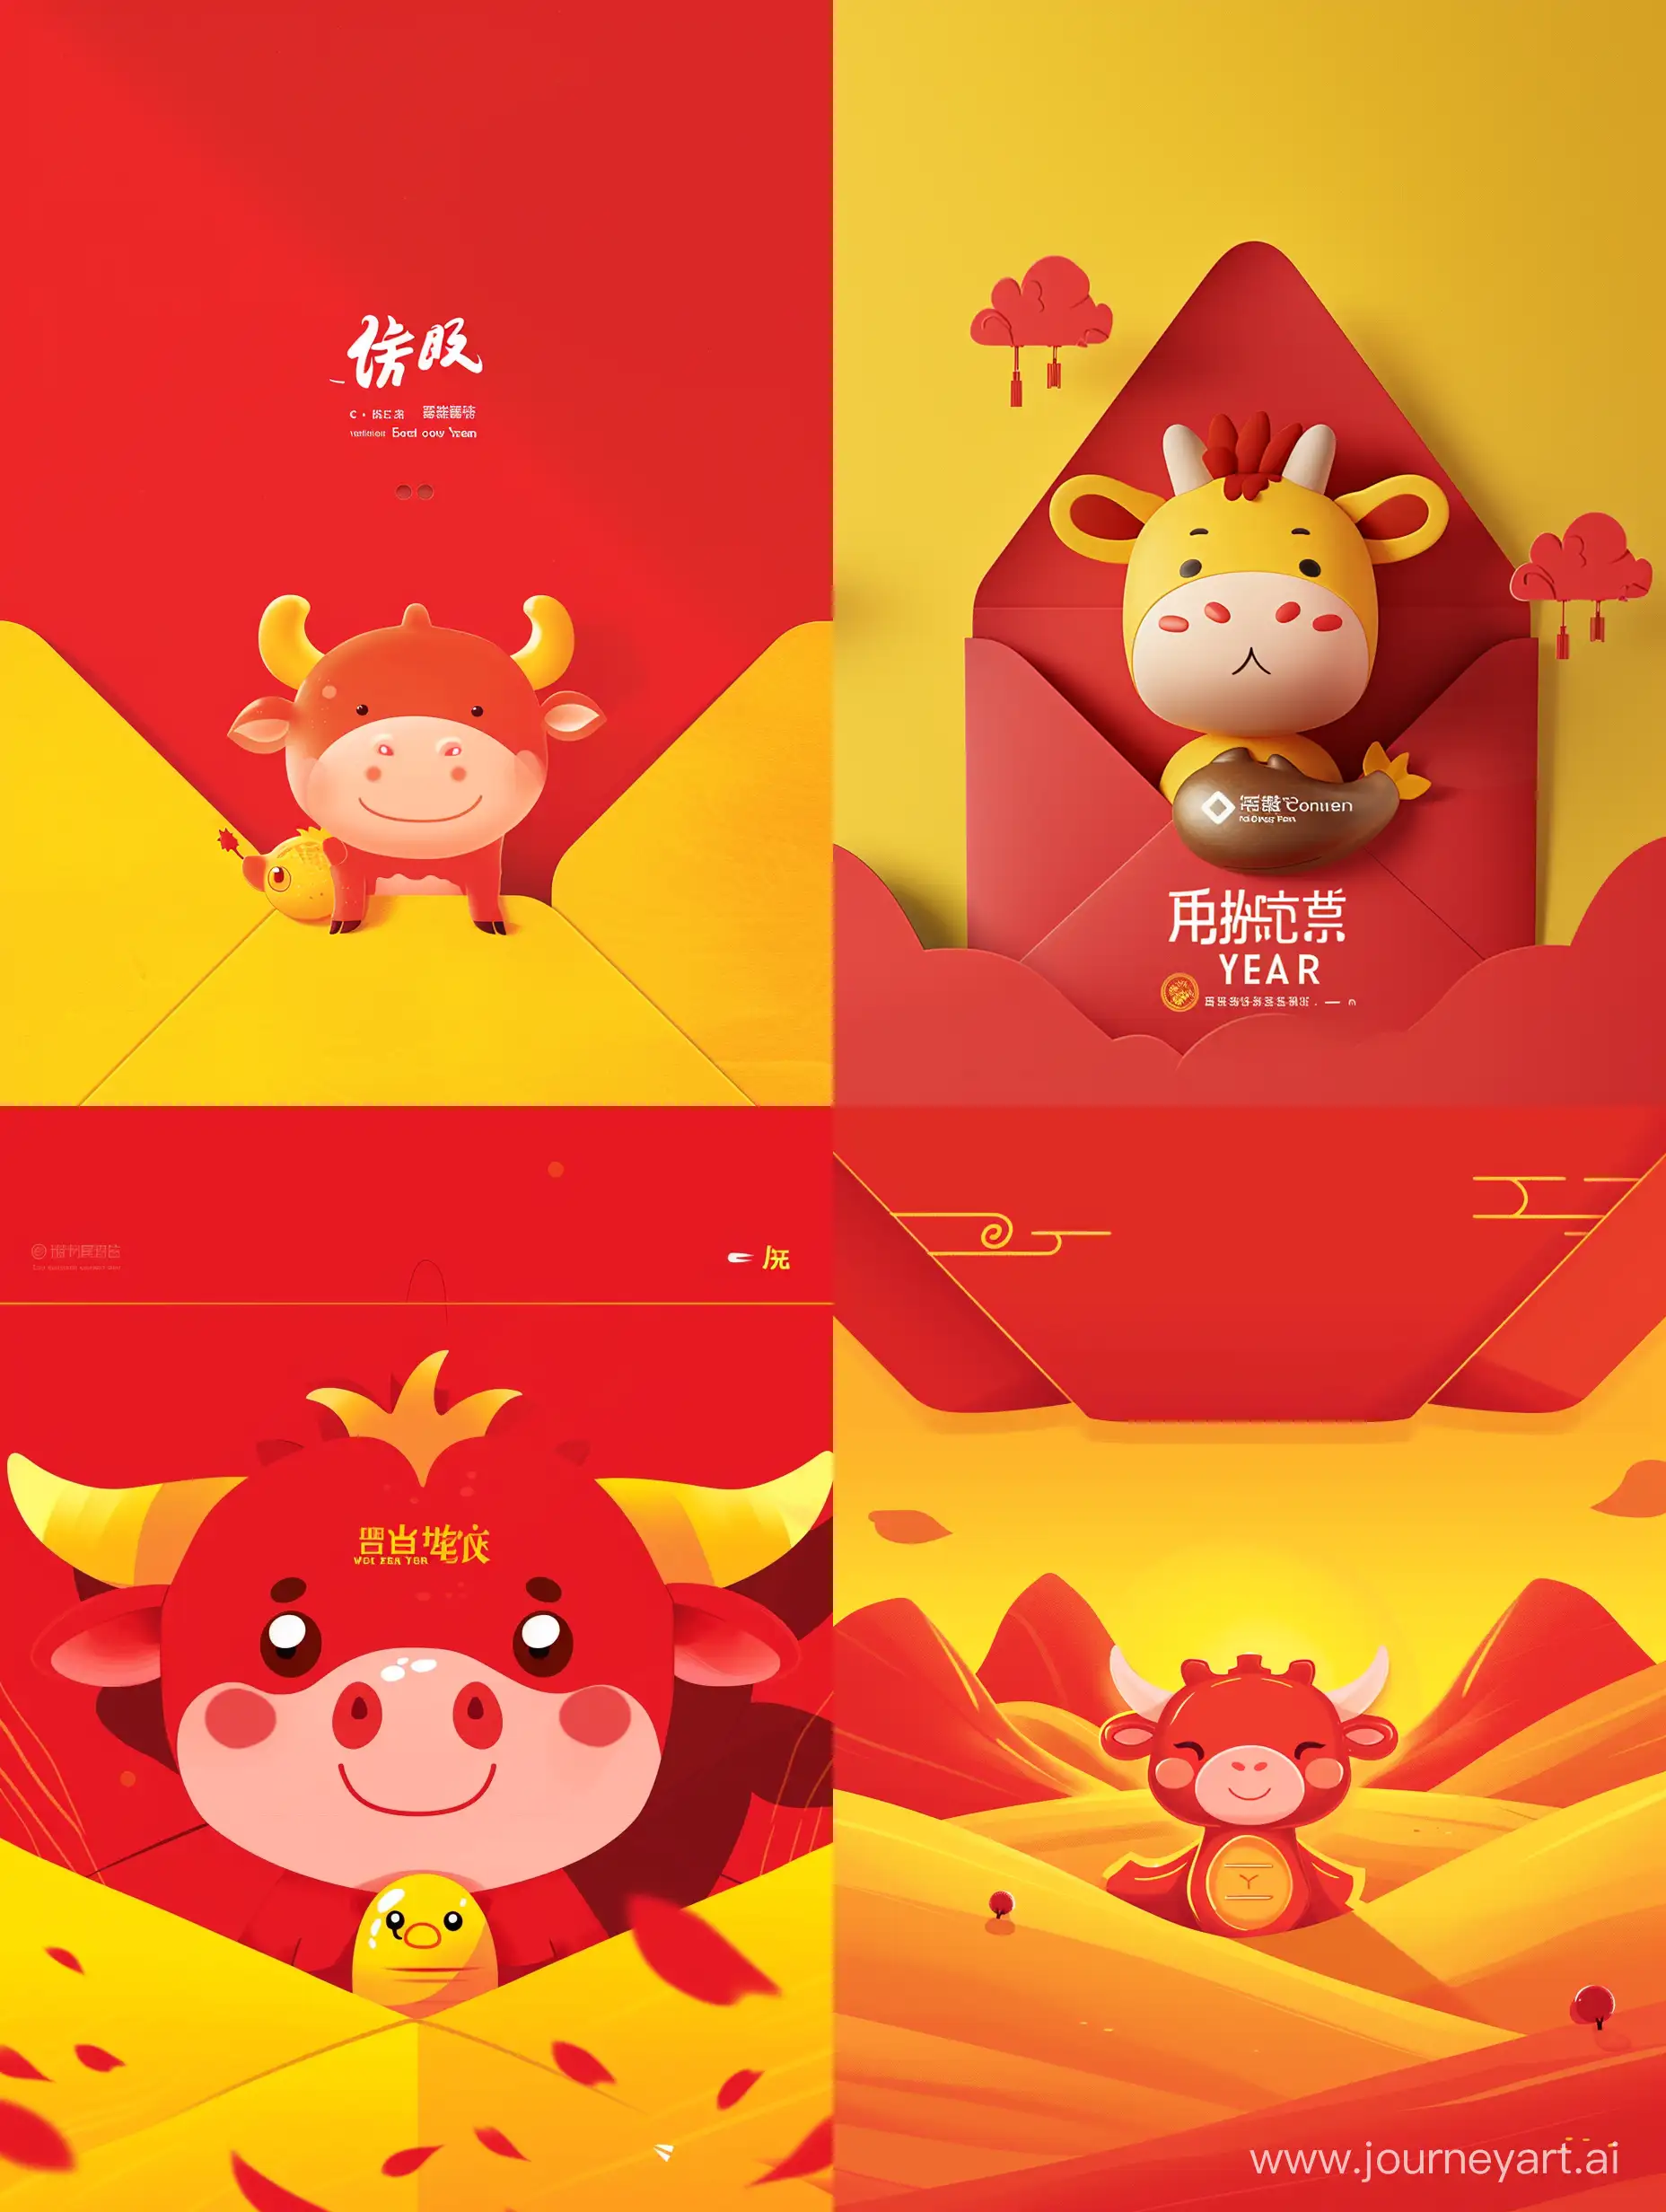 Modern-WeChat-Dragon-Year-Red-Envelope-with-Stylish-Seal-Cow-Design